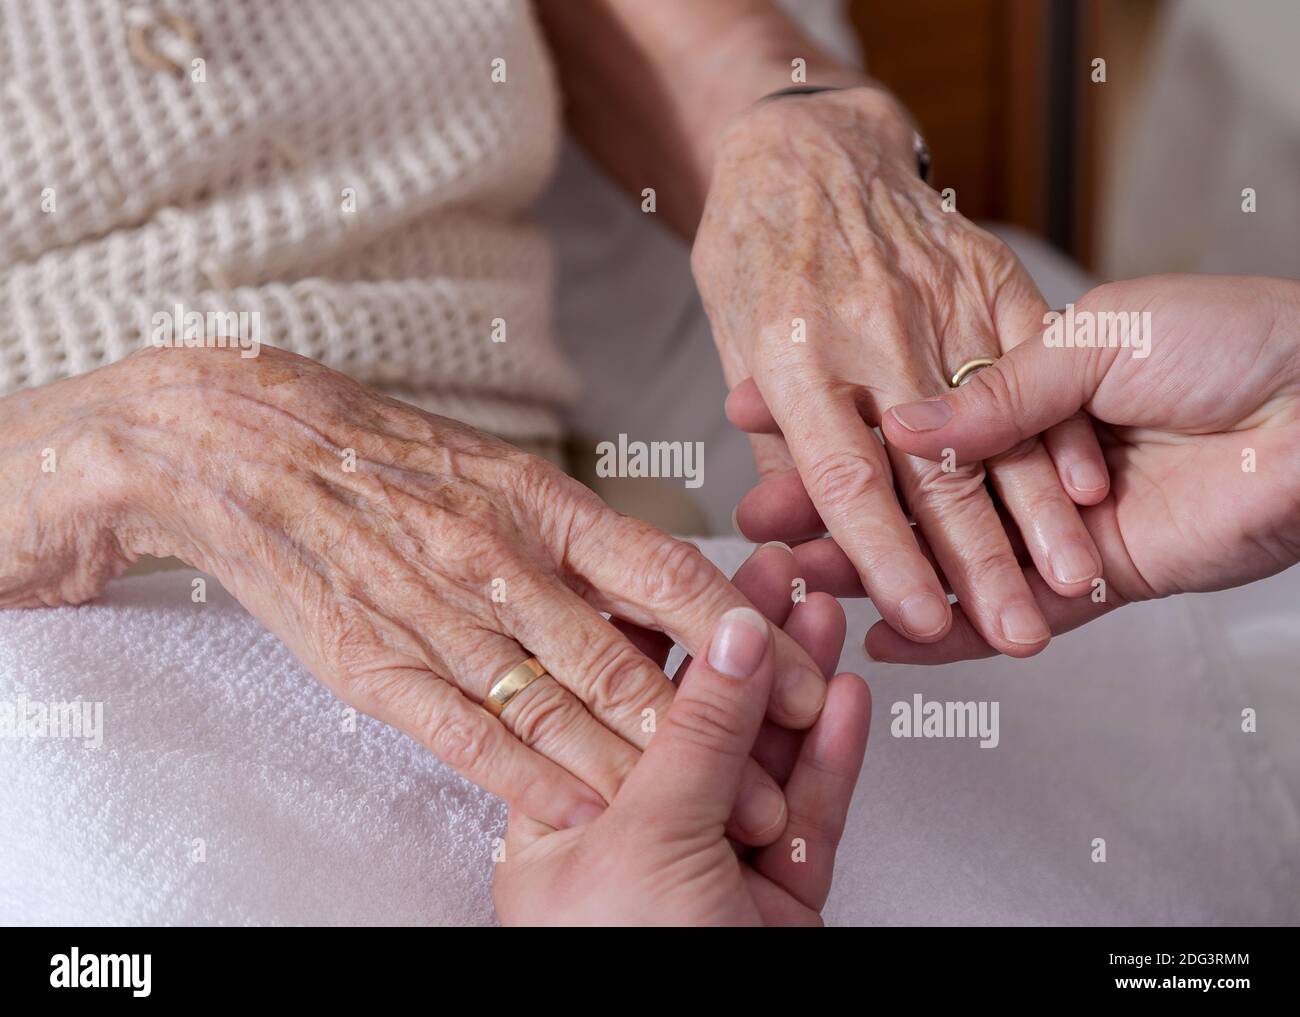 Helping hands Stock Photo